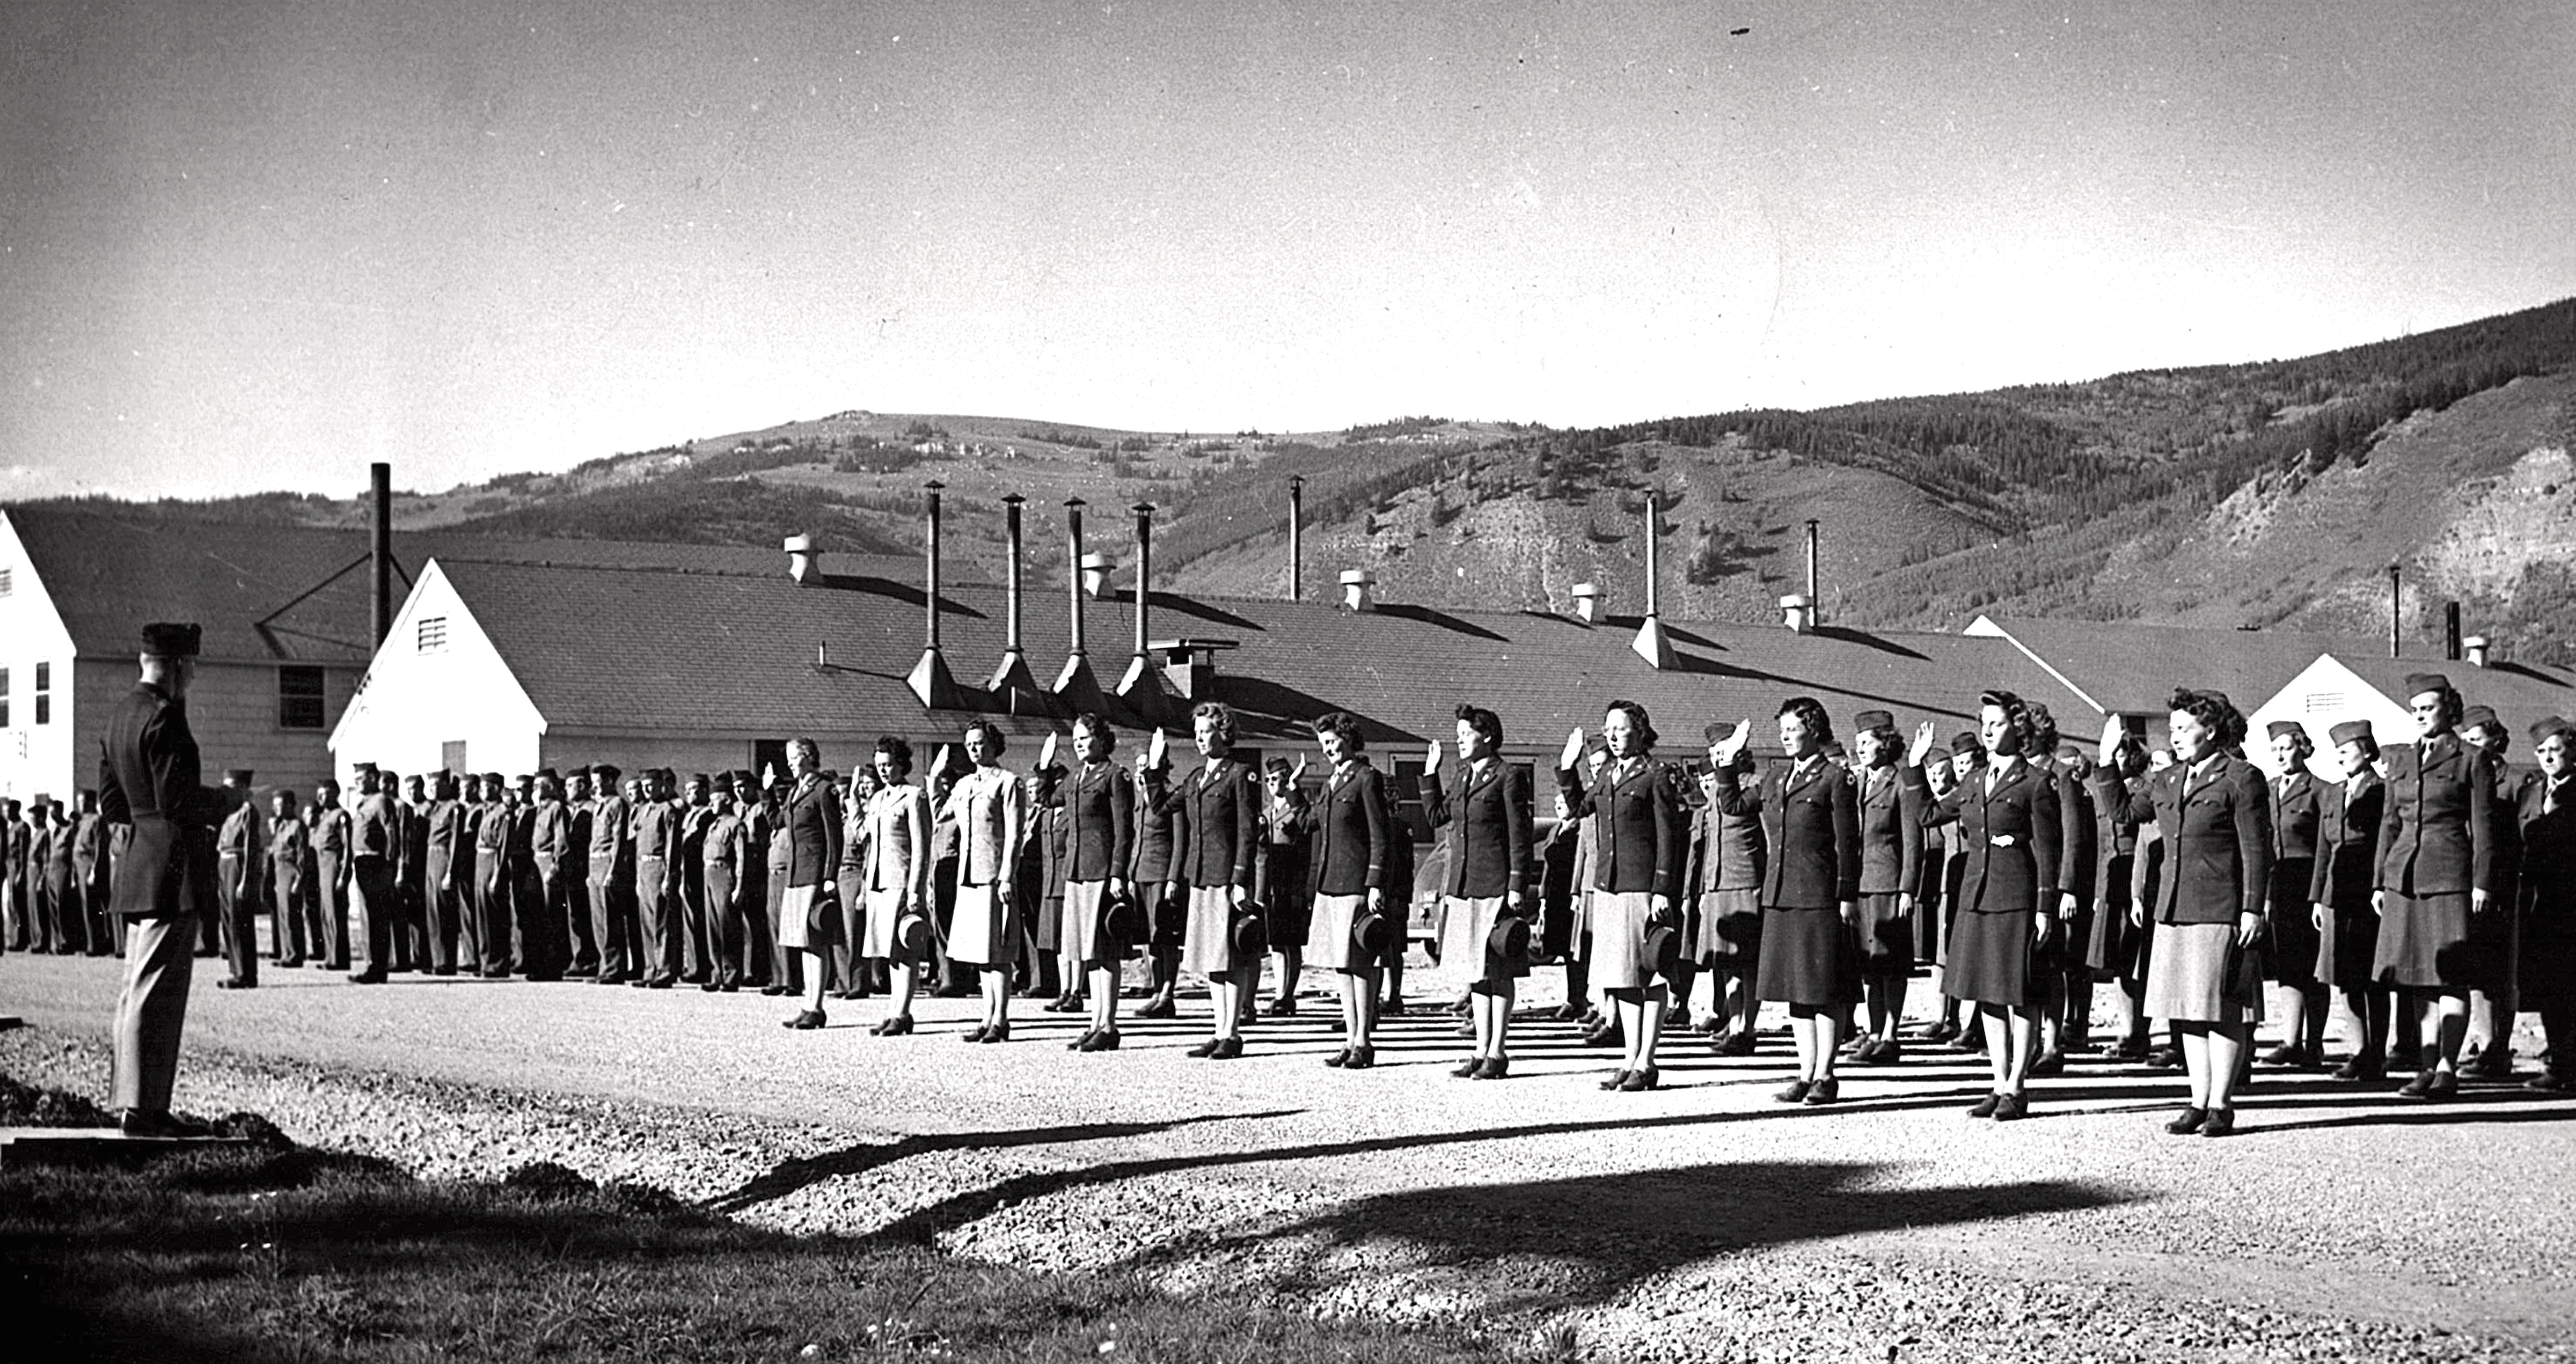 A group of women in uniform standing in formation, saluting an officer.